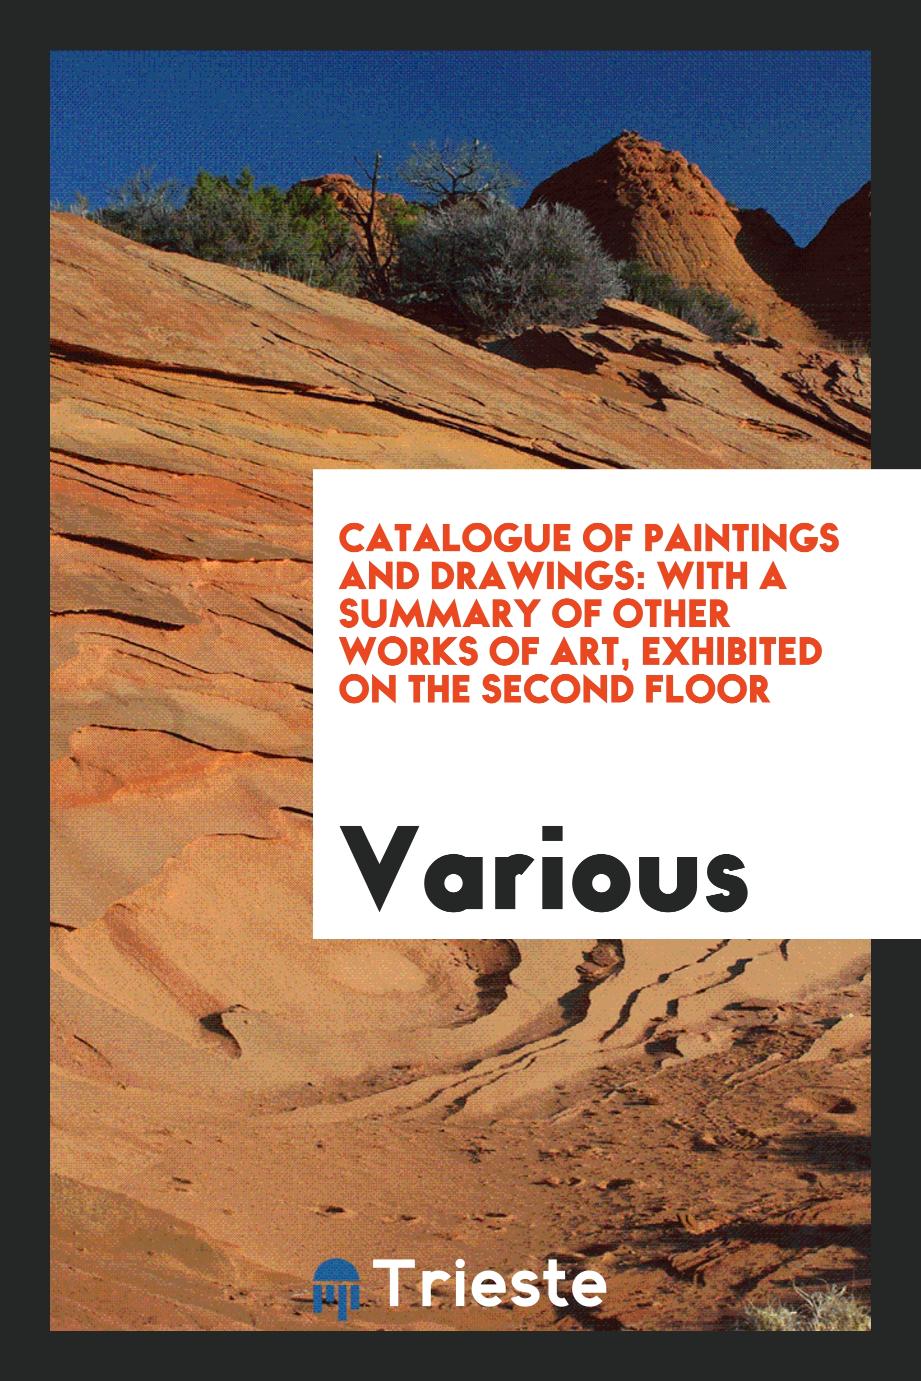 Catalogue of Paintings and Drawings: With a Summary of Other Works of Art, Exhibited on the Second Floor